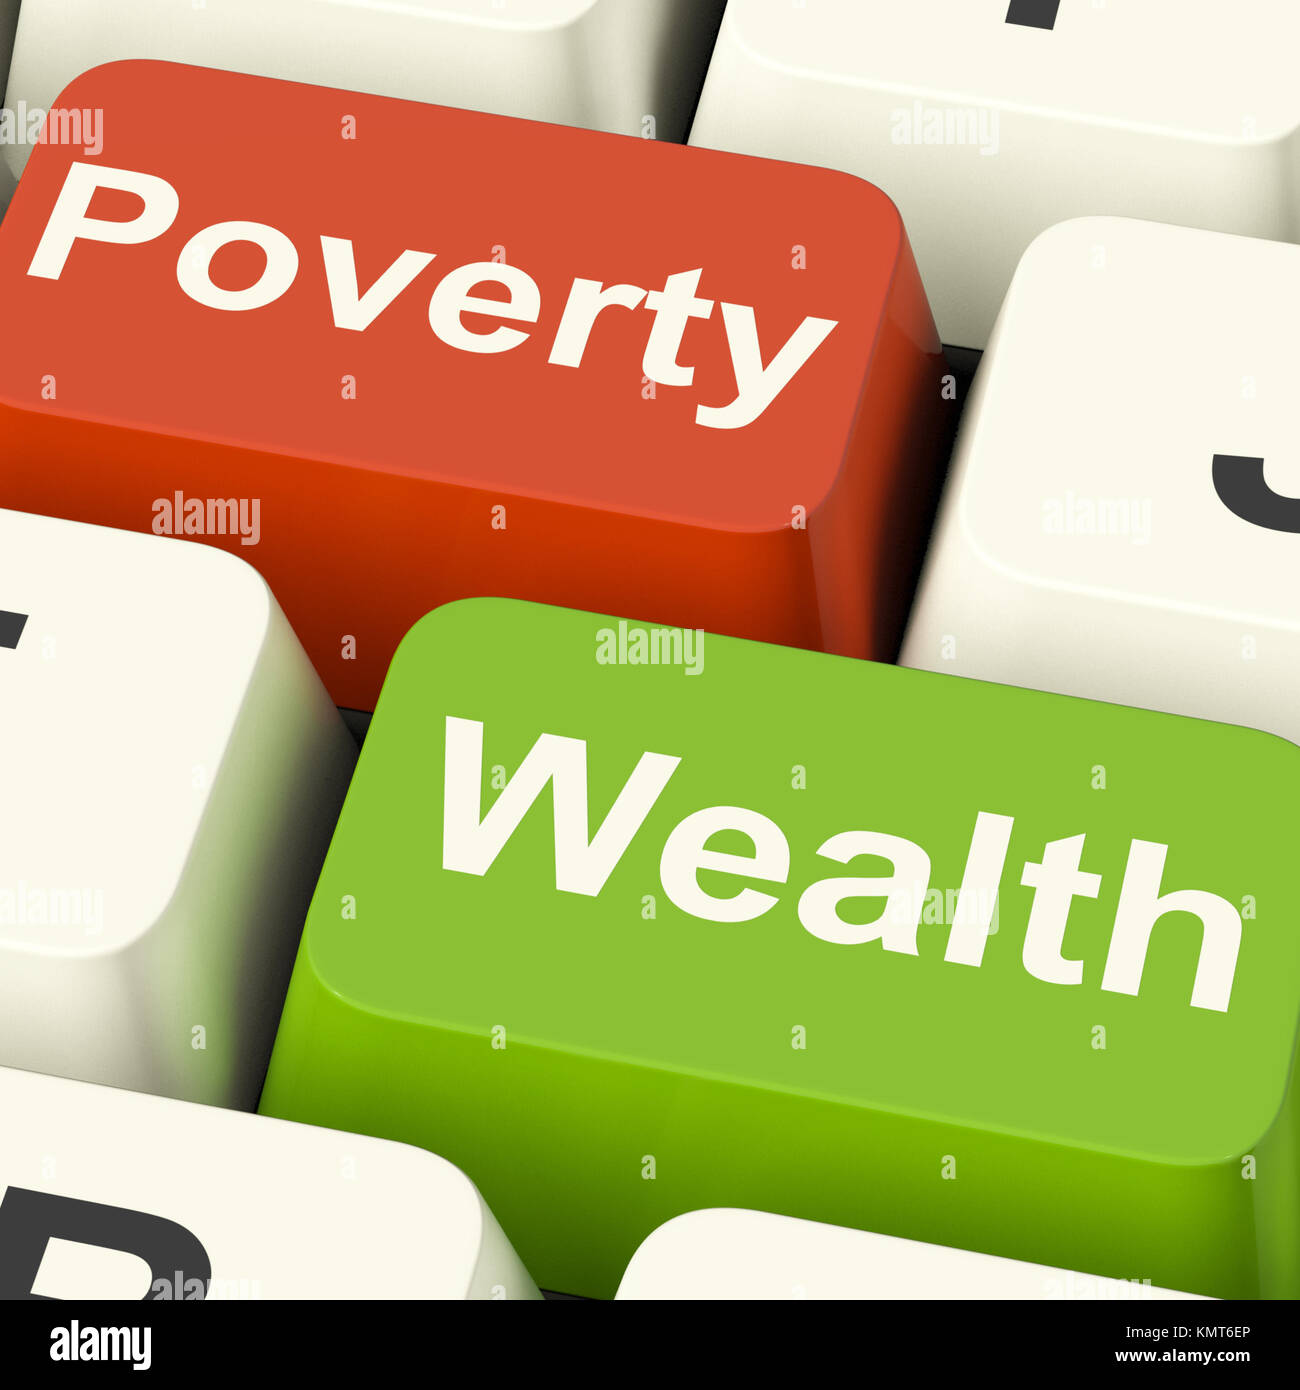 Poverty And Wealth Computer Keys Showing Rich Against Poor Stock Photo